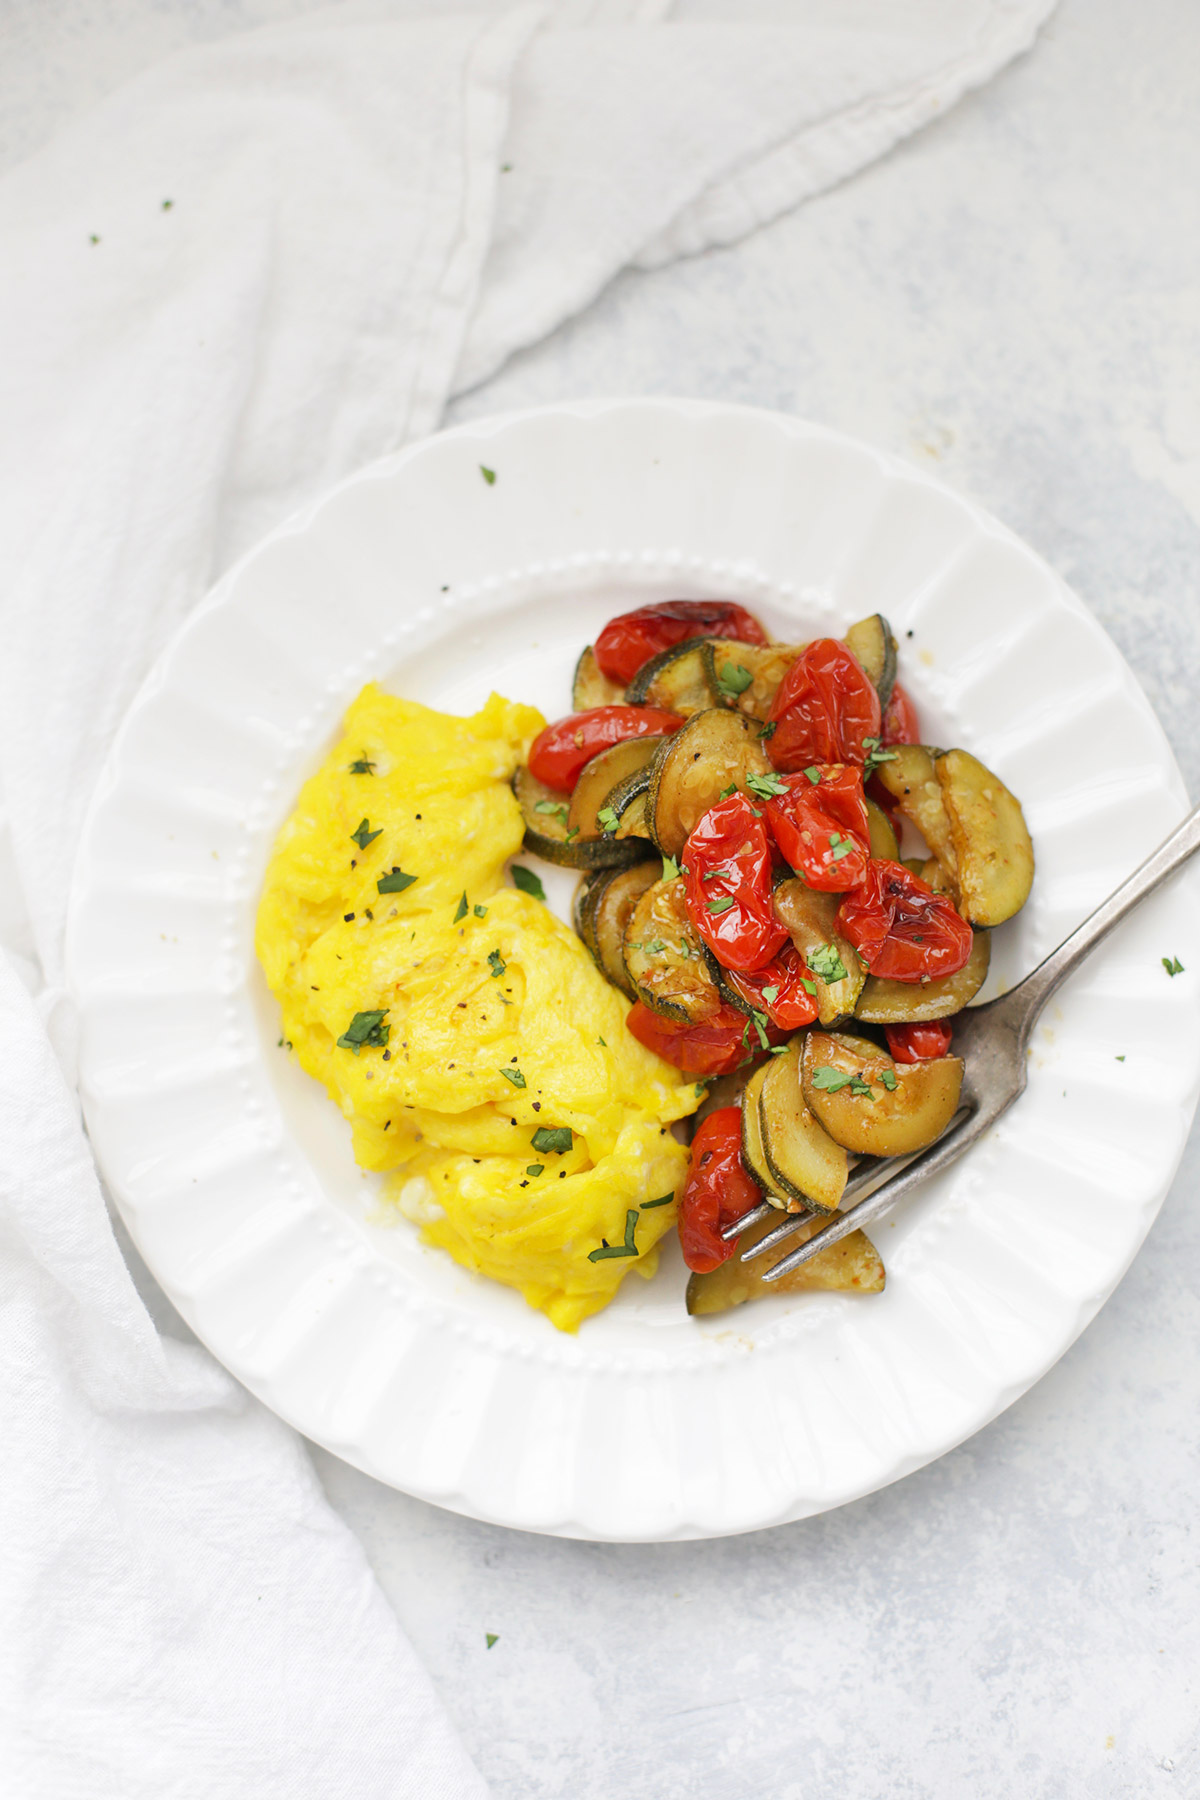 Soft-scrambled eggs with simply roasted zucchini and tomatoes on the side.